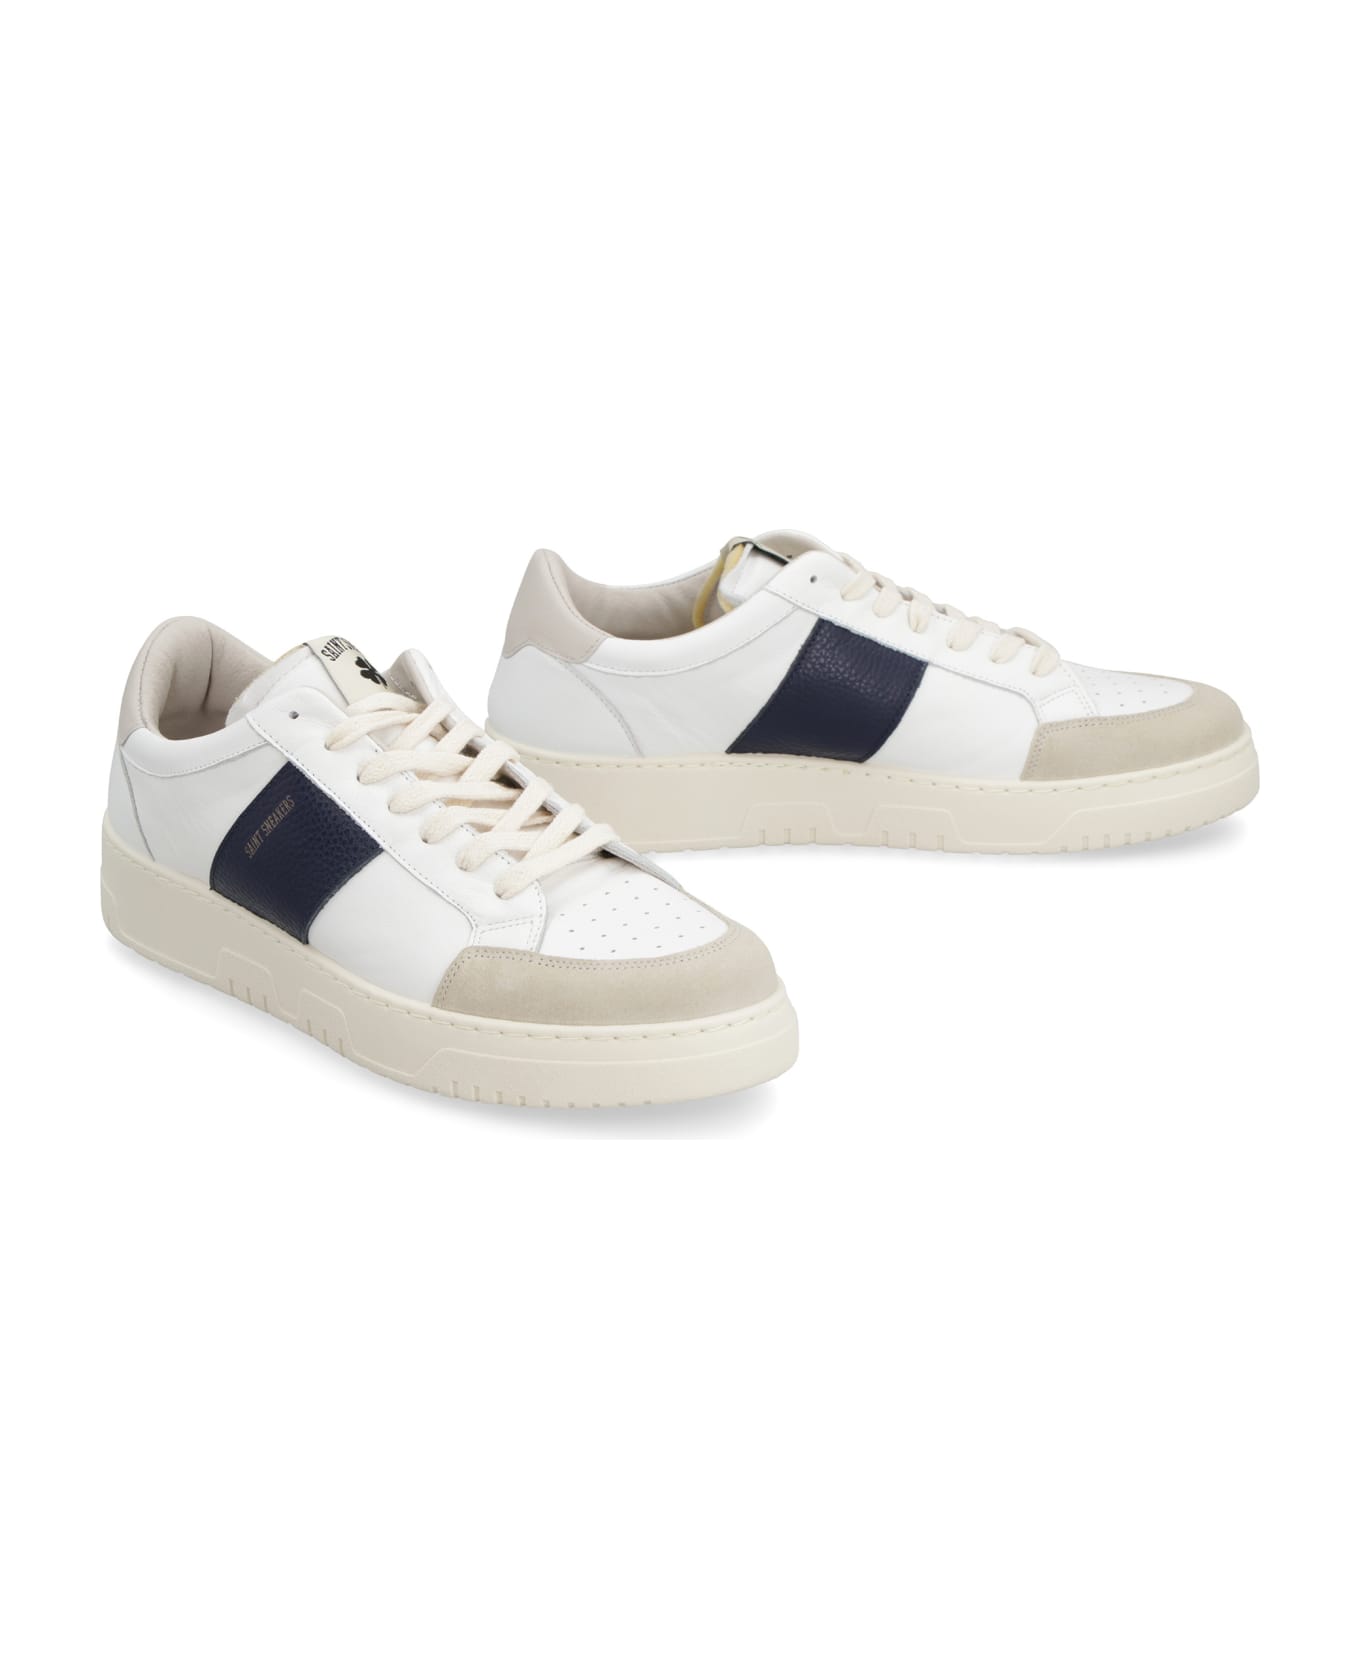 Saint Sneakers Sail Leather Low-top Sneakers - White